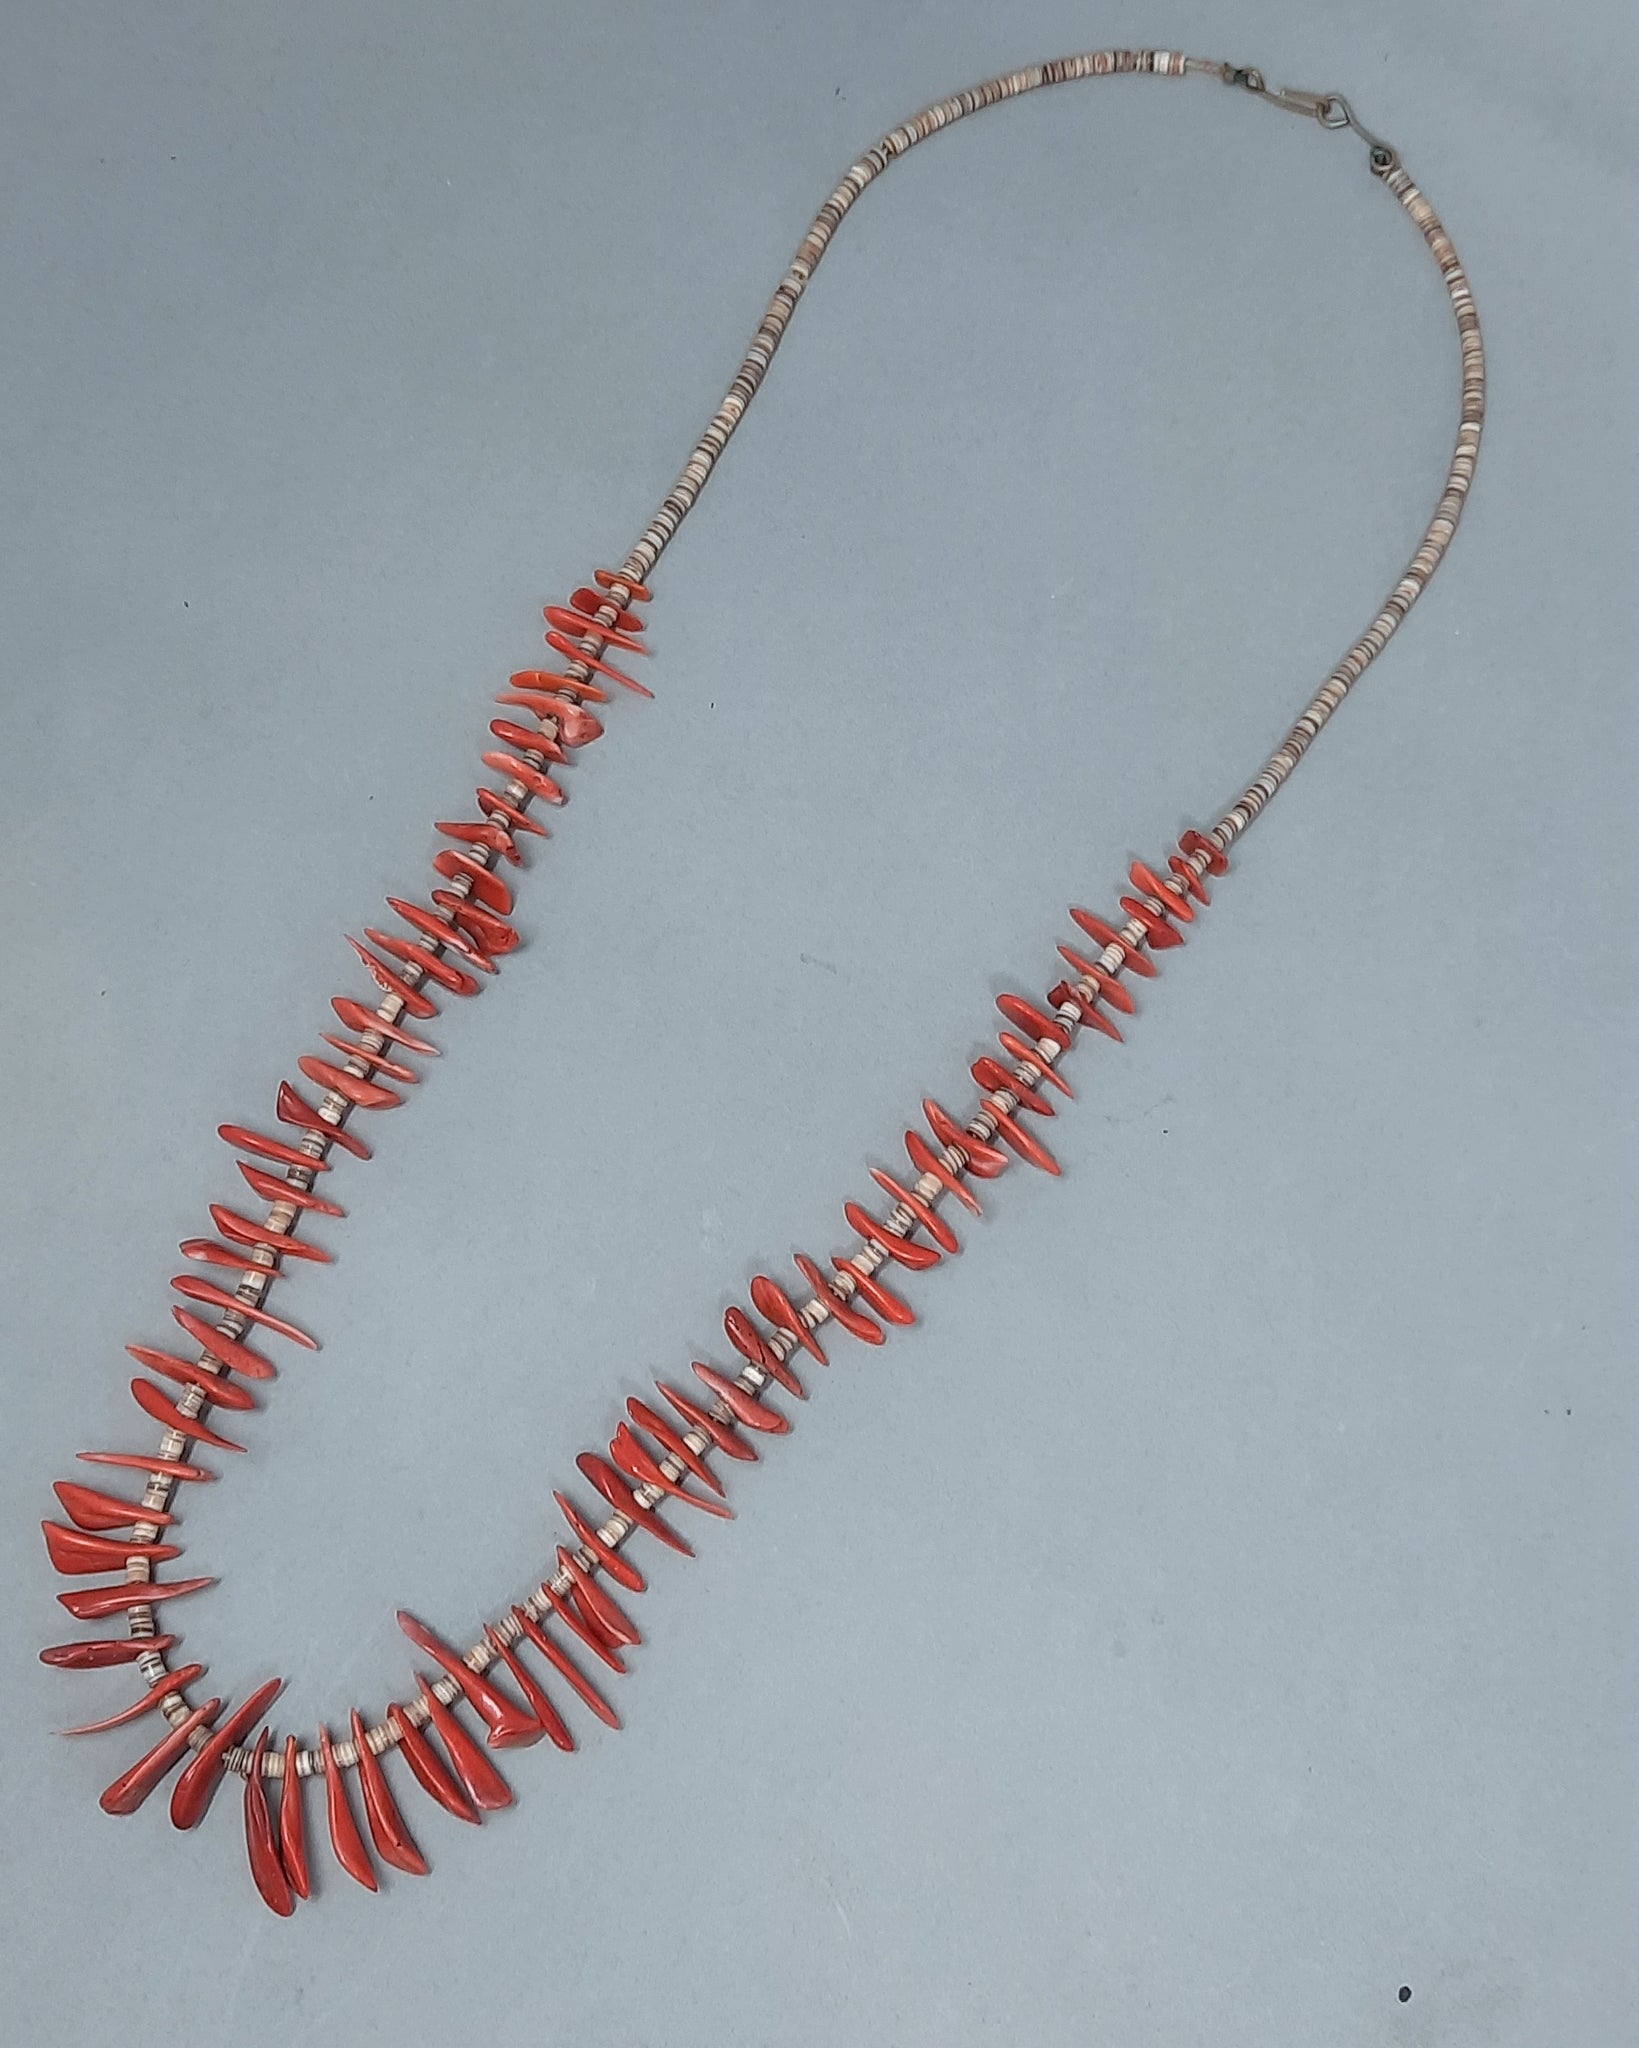 Vintage Coral Tab and Heishi Bead Necklace 28"